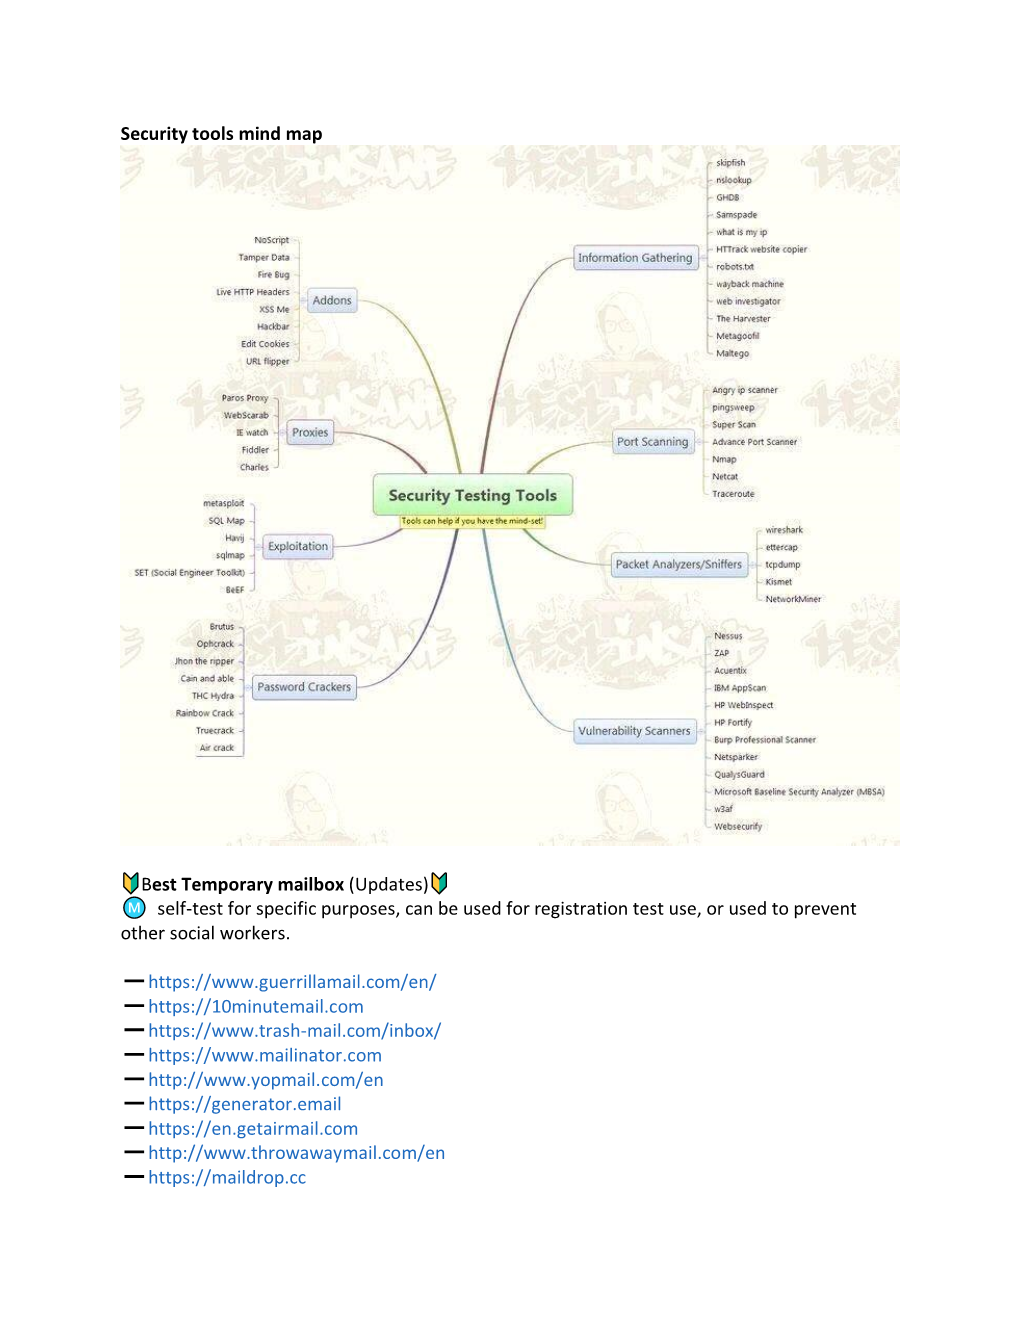 Security Tools Mind Map Best Temporary Mailbox (Updates)